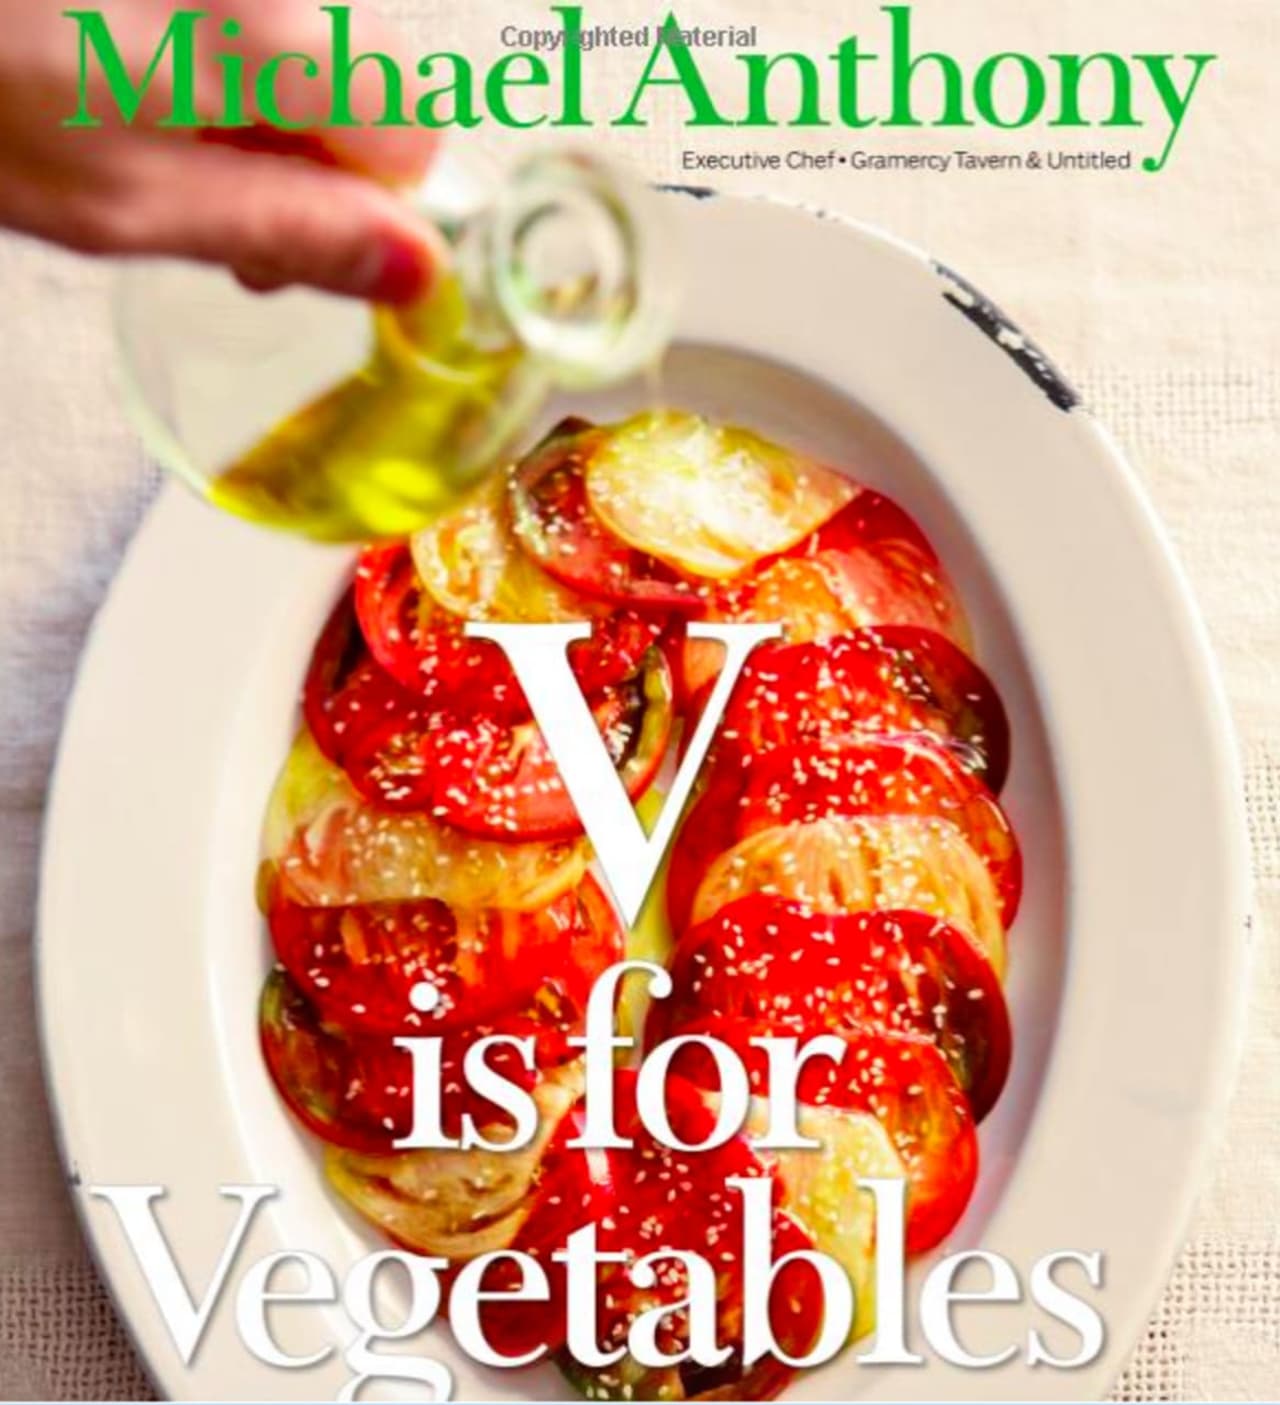 There will be a book signing with author and chef Michael Anthony for "V is for Vegetables" at The Egg student dining venue at The Culinary Institute of America in Hyde Park.